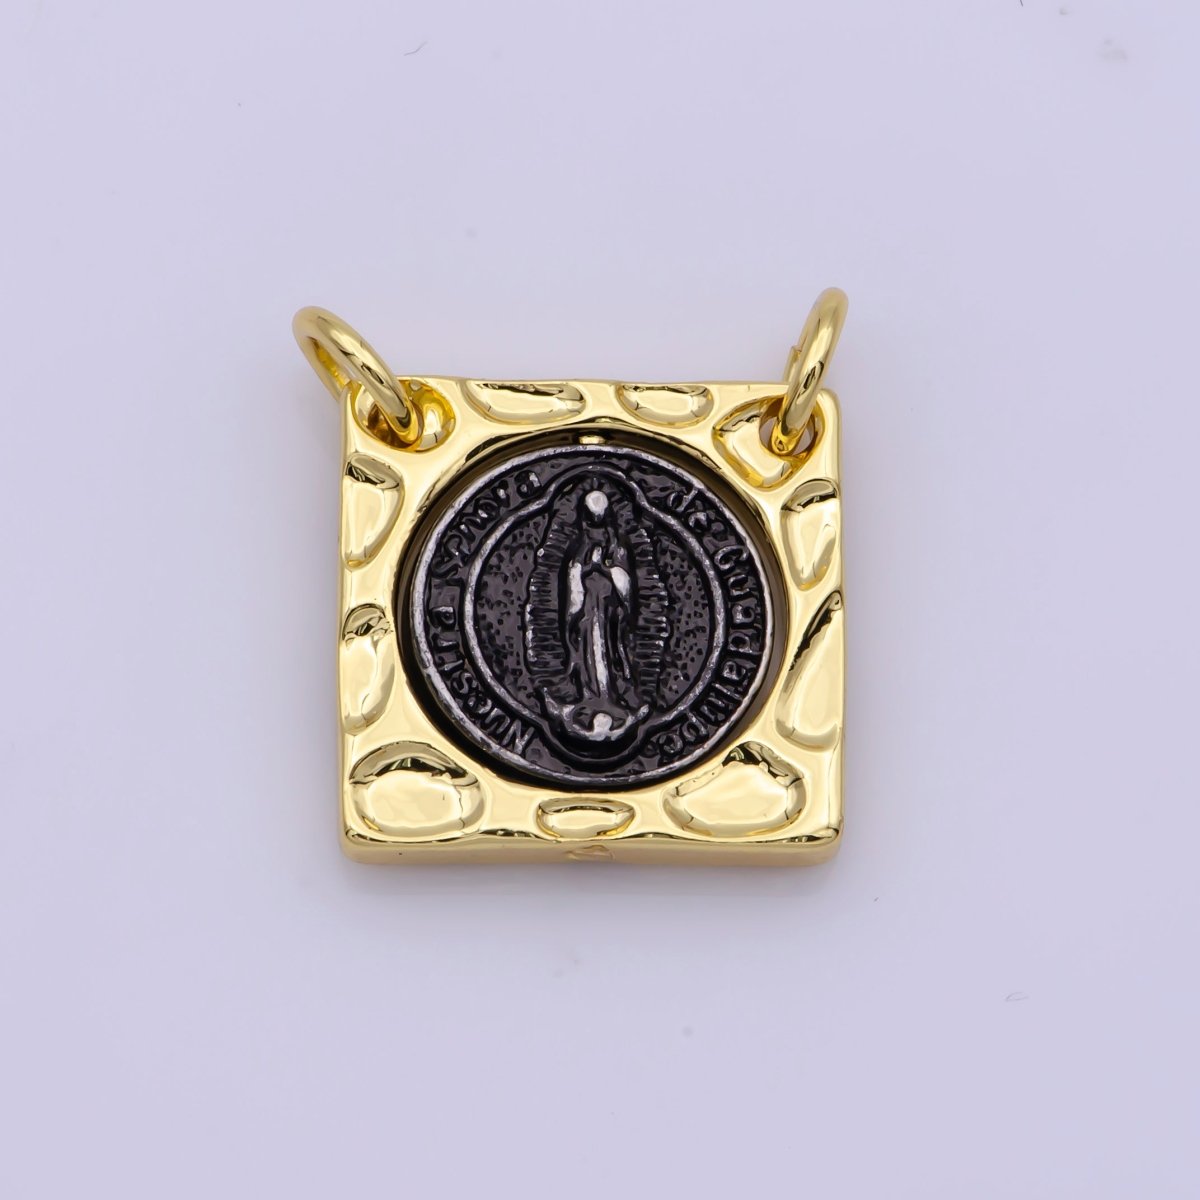 Dainty Vintage Square Lady Gudalupe Charm Religious Medallion Necklace Pendant Mother Virgin Mary for Jewelry Making - DLUXCA